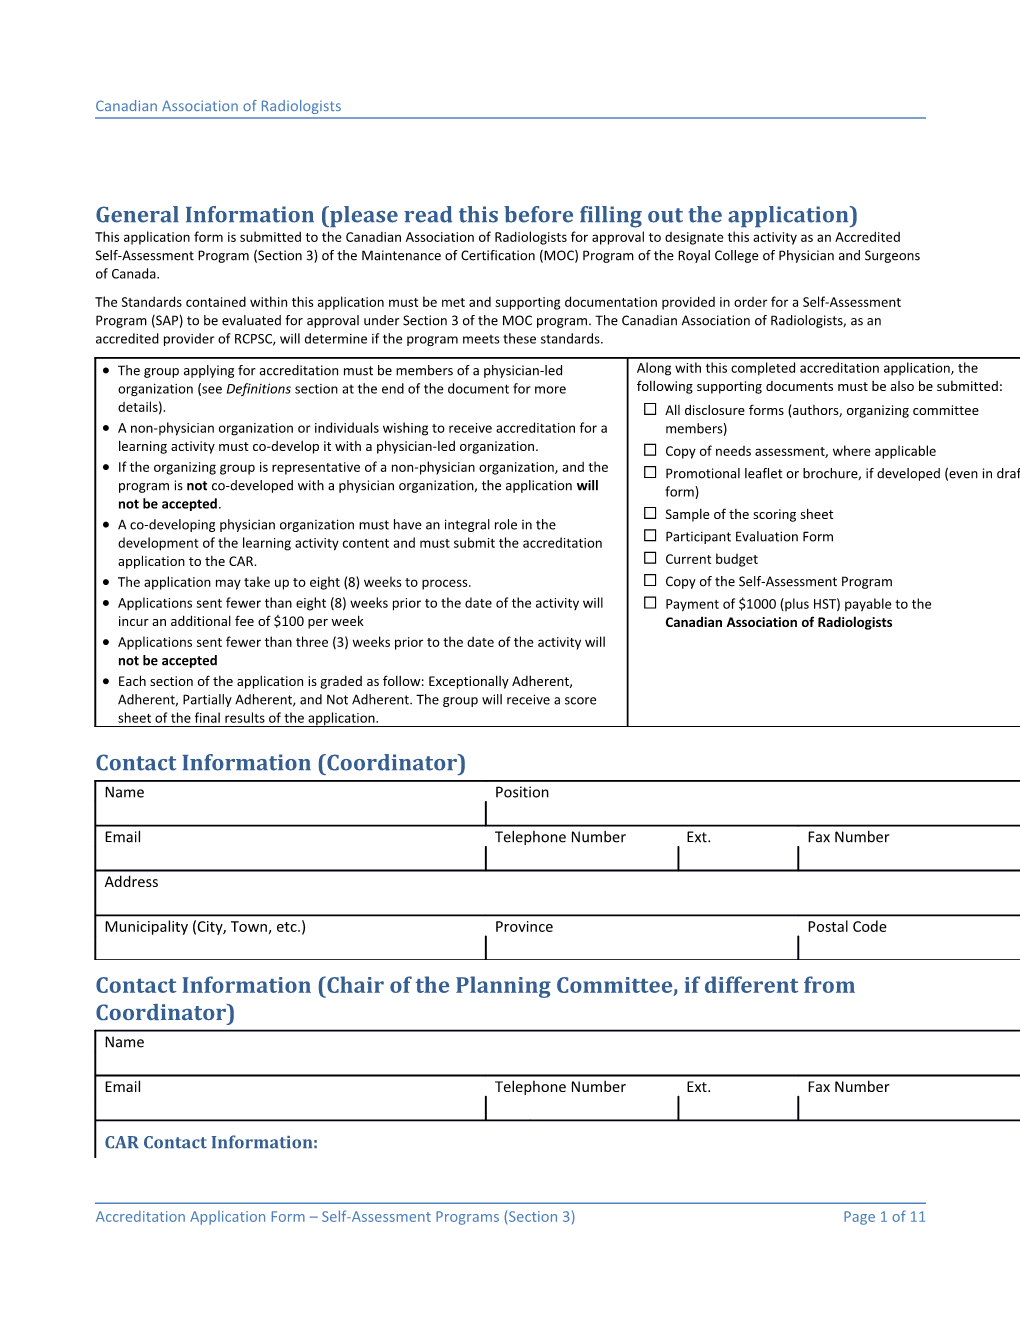 General Information (Please Read This Before Filling out the Application)